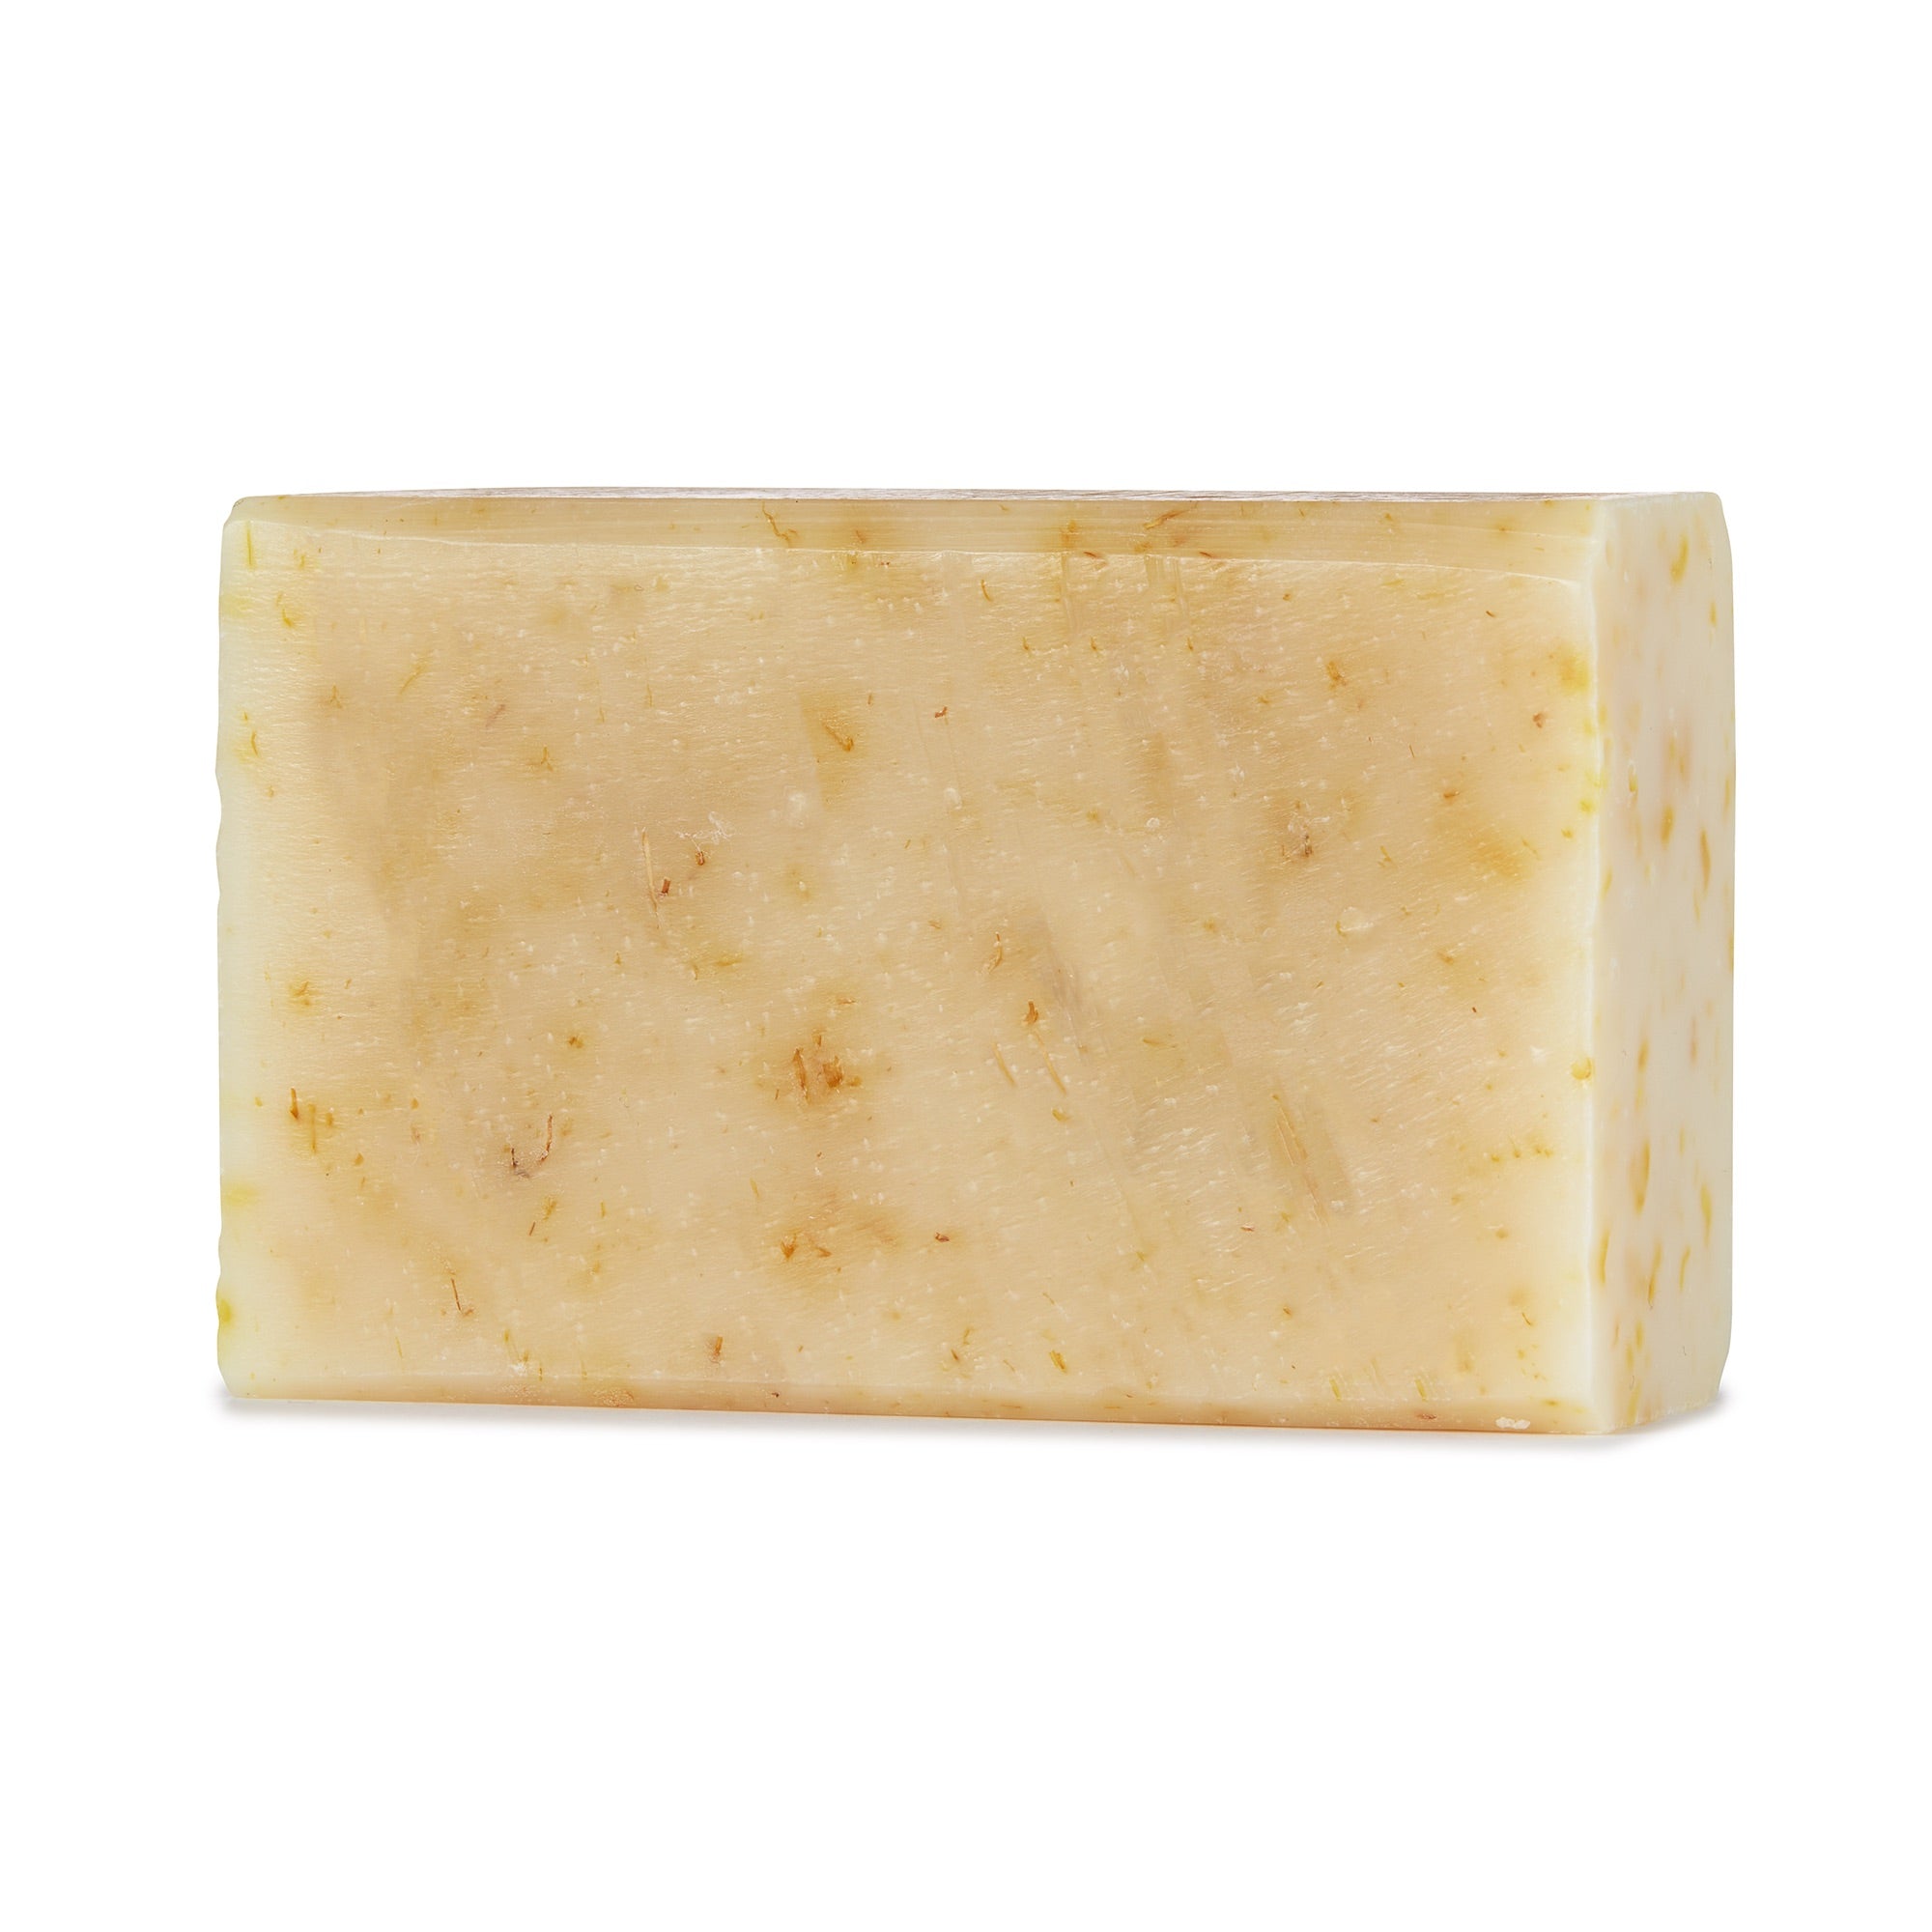 Image of the Bia Unscented Soap